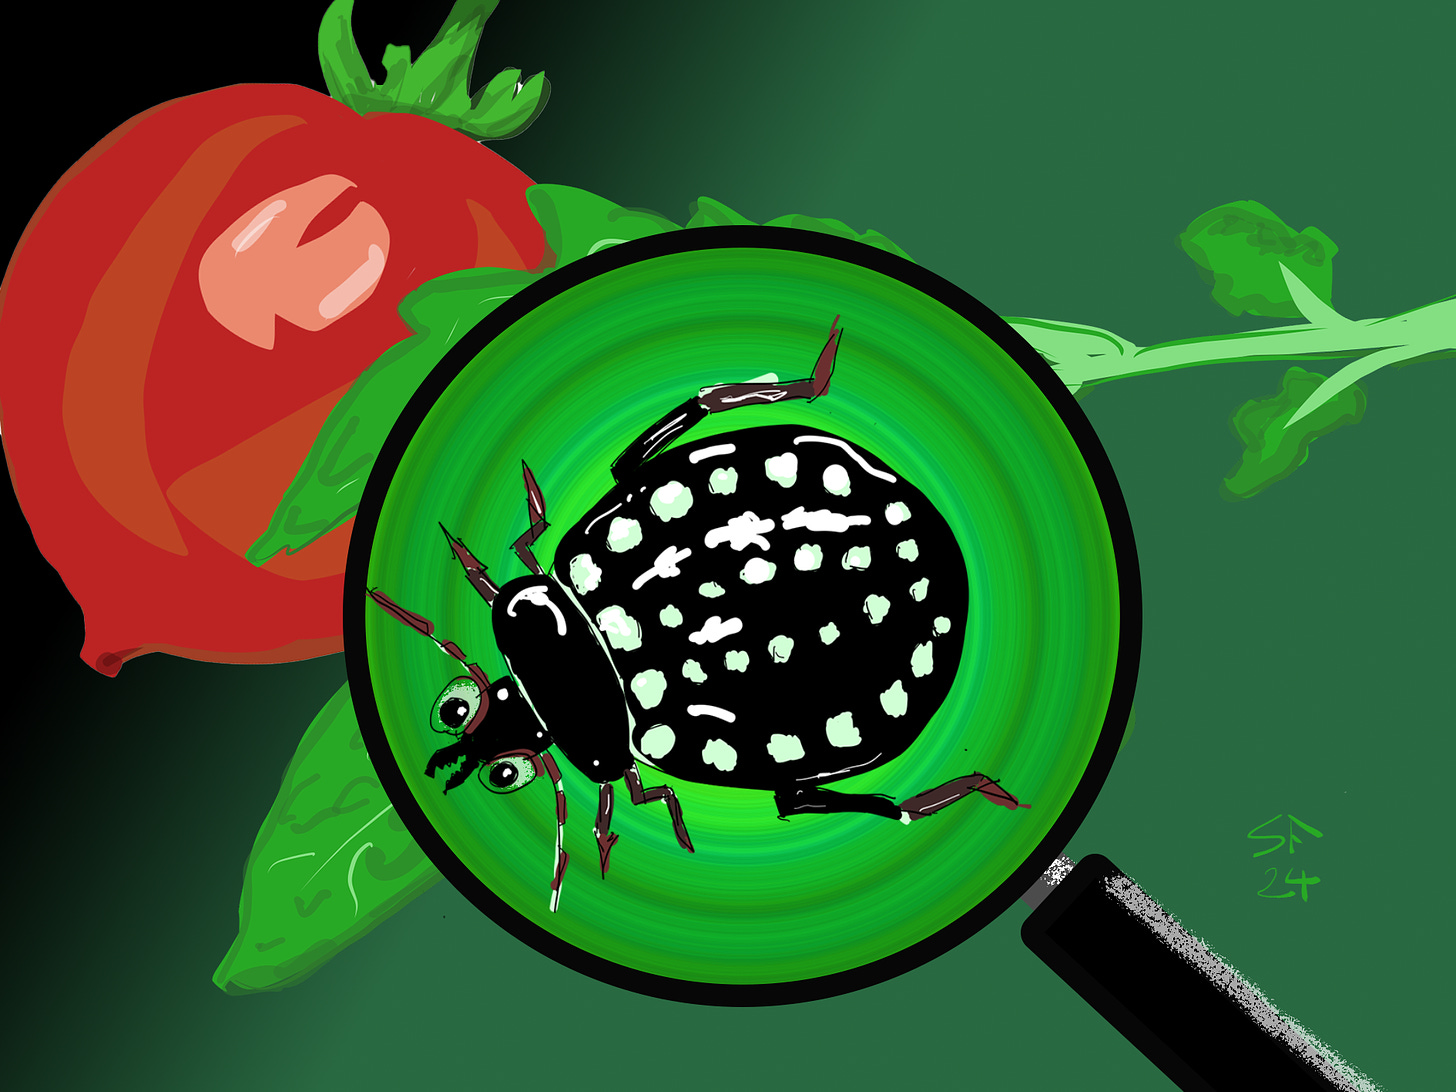 Cartoon: vicious-looking spotted bug on tomato leaf, under magnifying glass. Ripe tomato in background